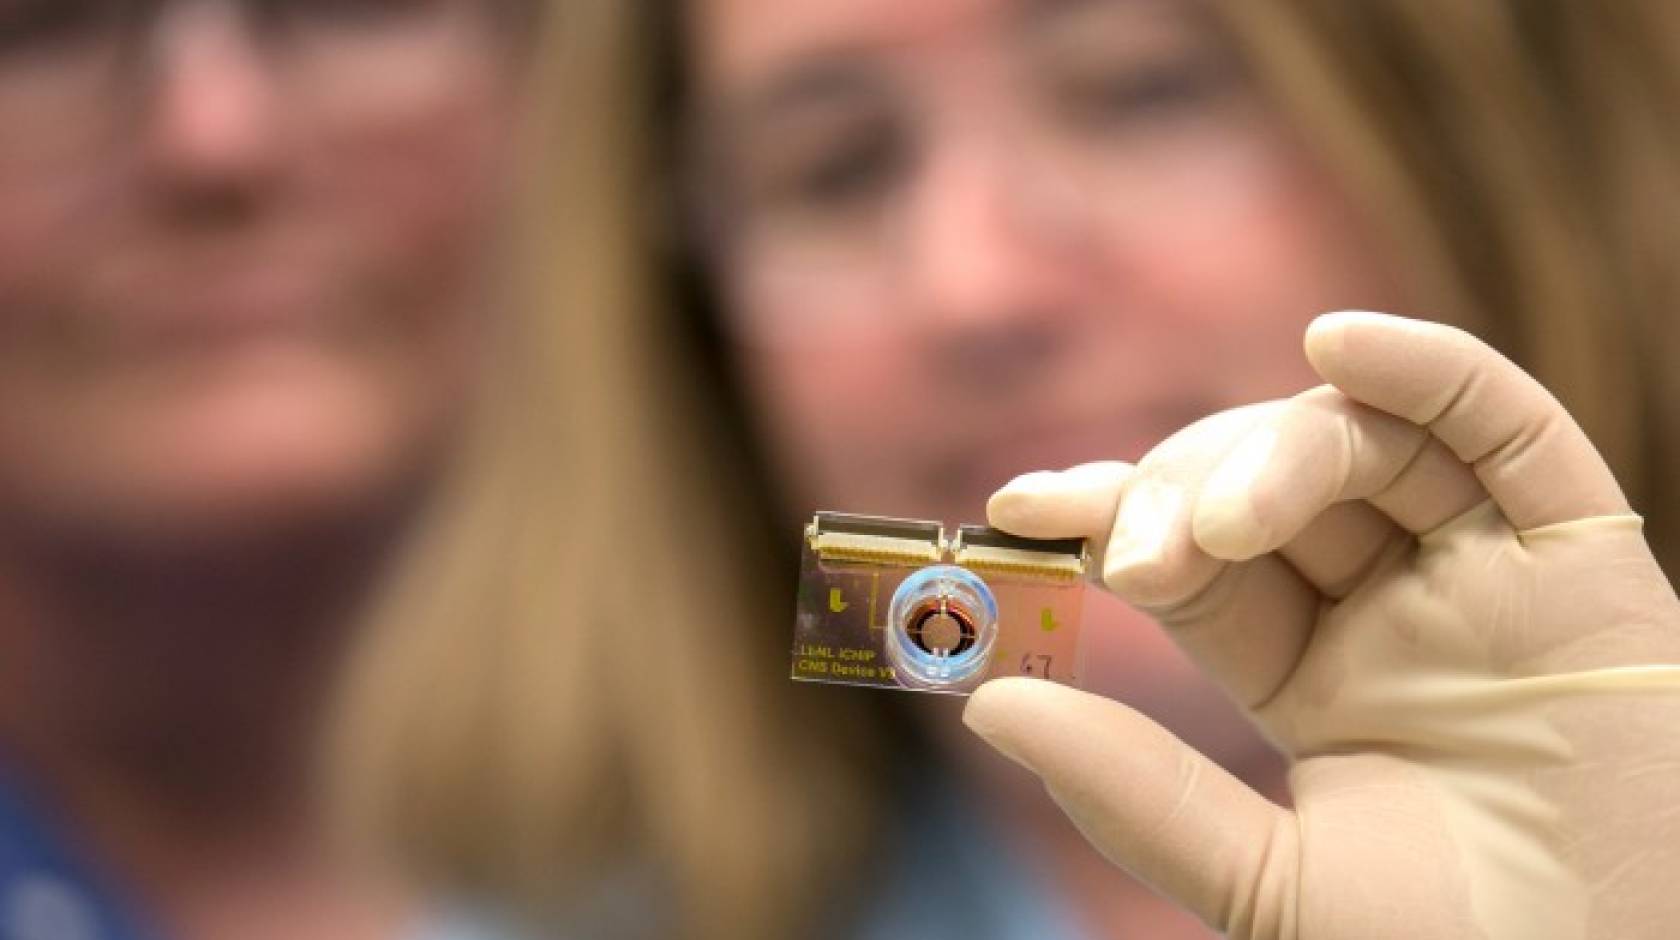 Lawrence Livermore National Laboratory is developing “human-on-a-chip,” a miniature external replication of the human body